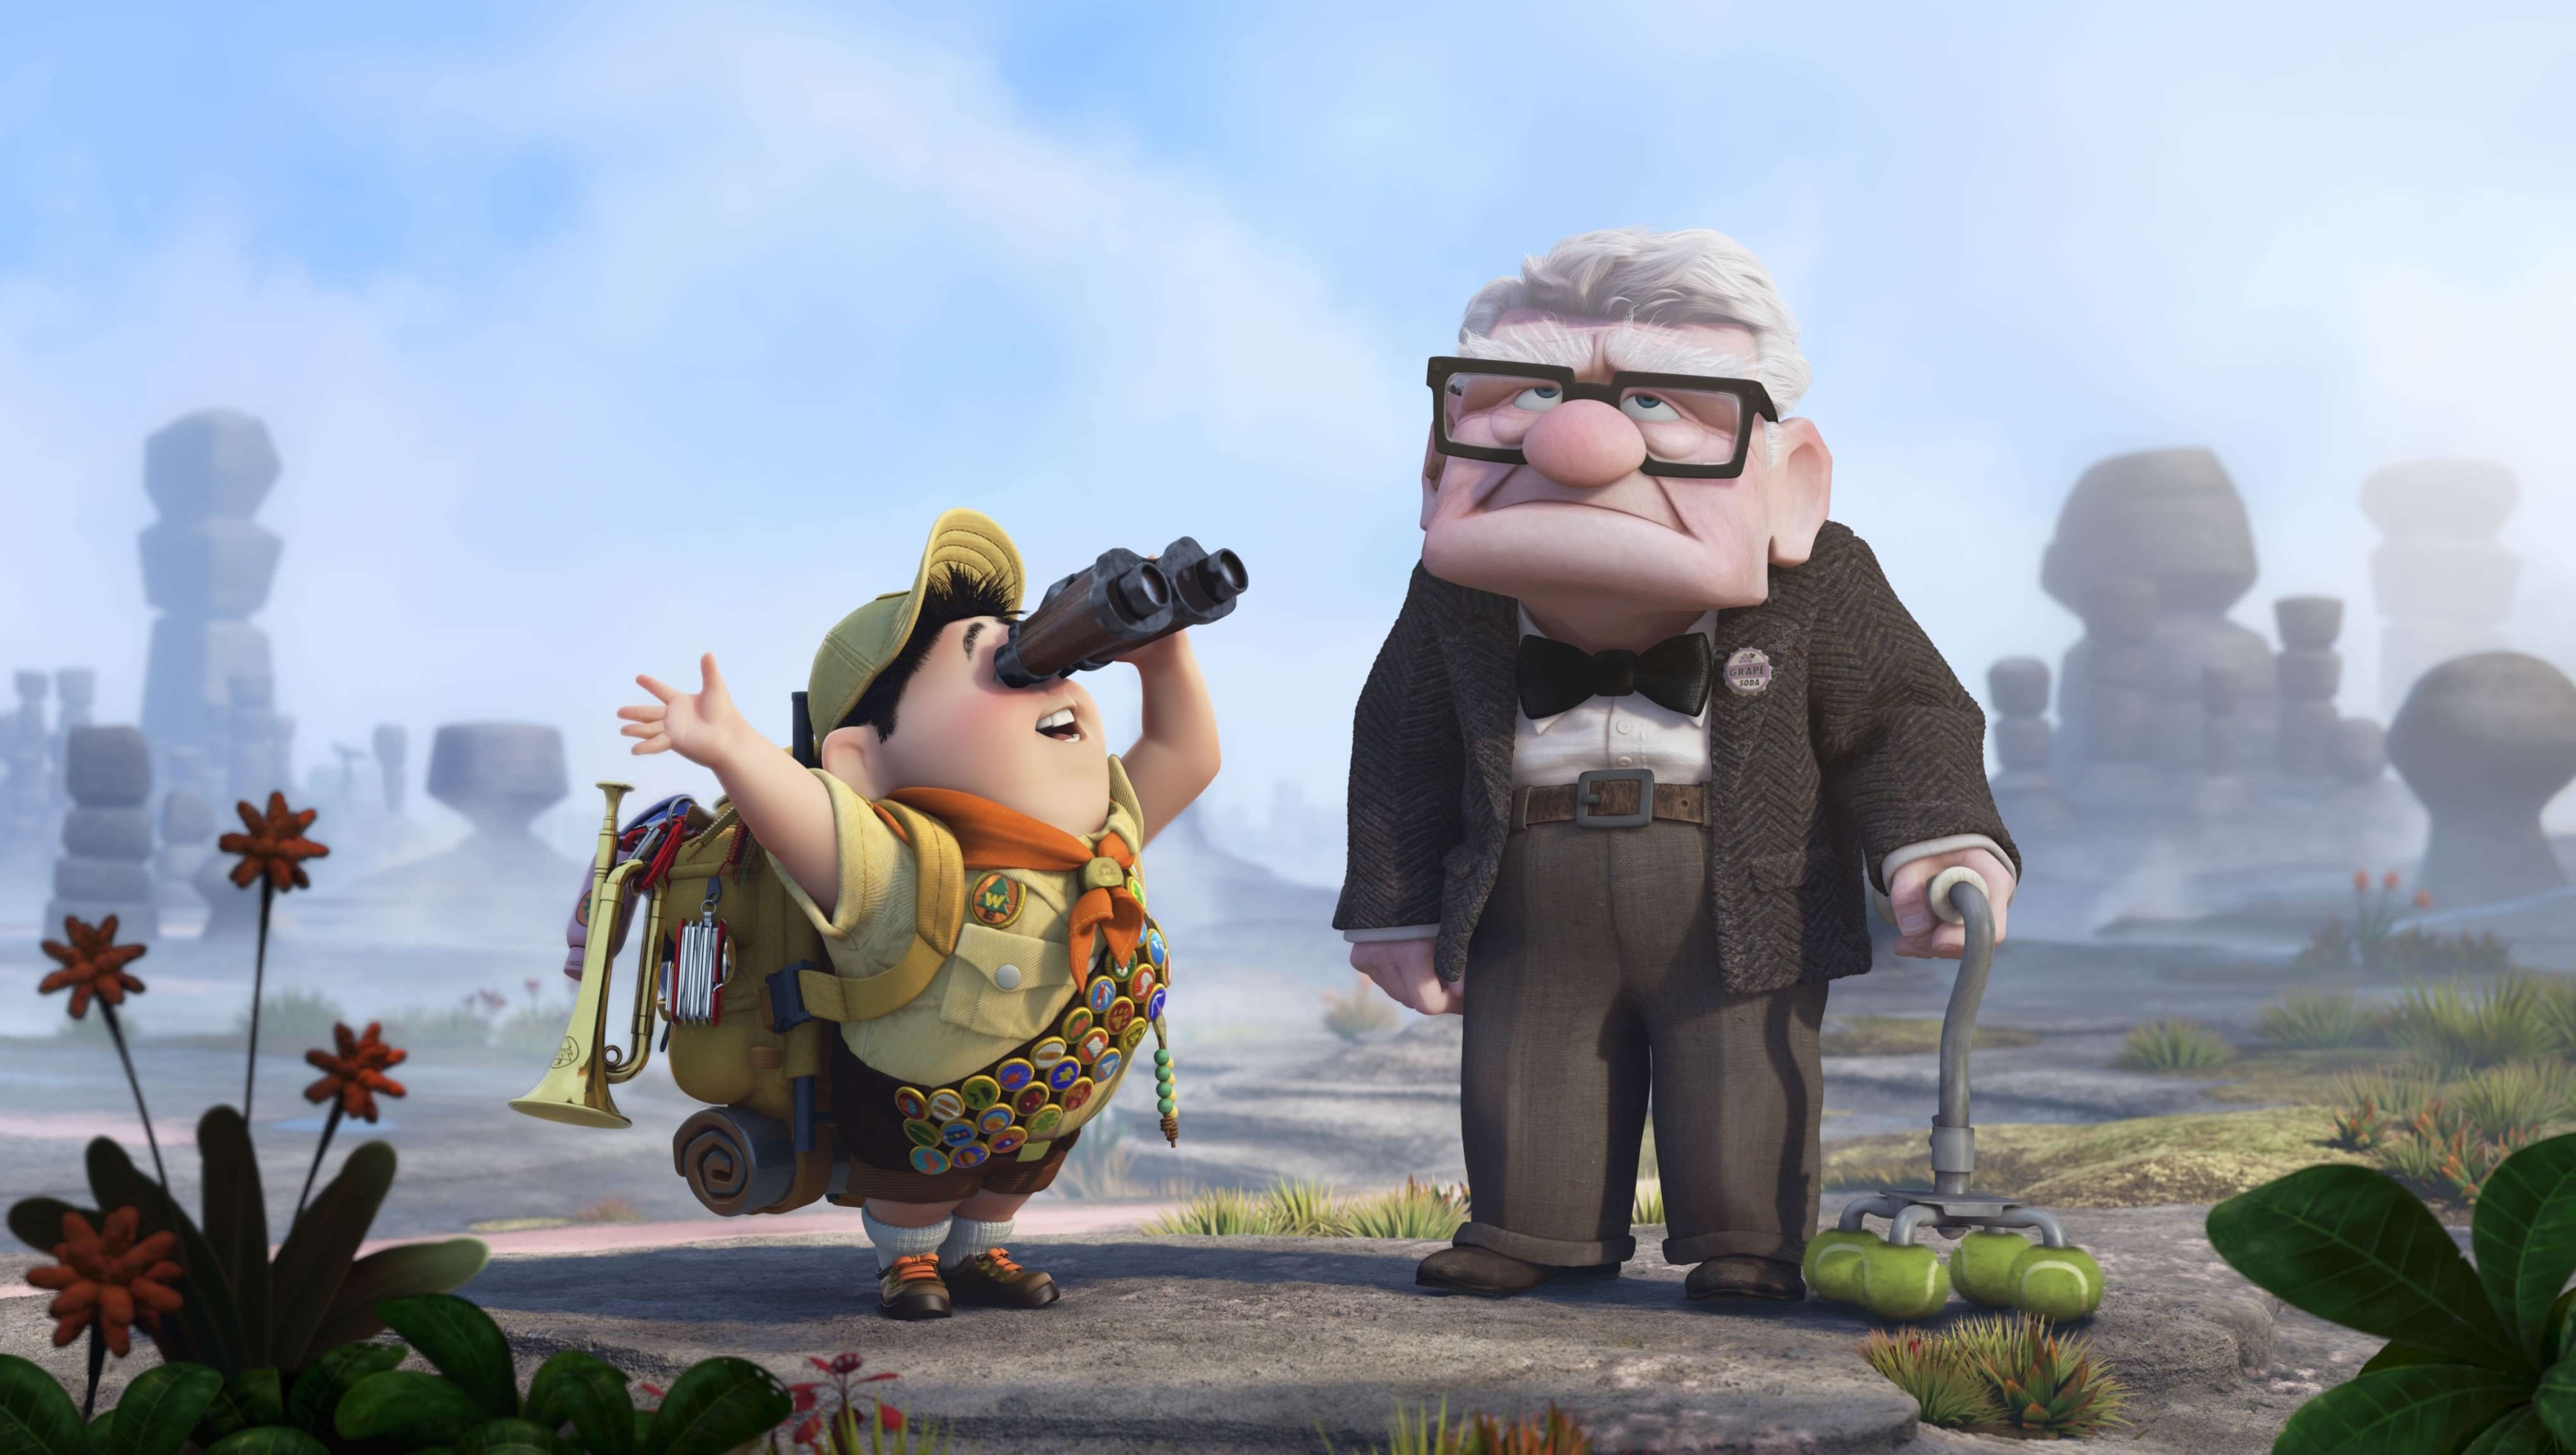 Free Up Pixar wallpapers, Colorful animated film, High-flying adventure, Heartwarming story, 3500x1980 HD Desktop